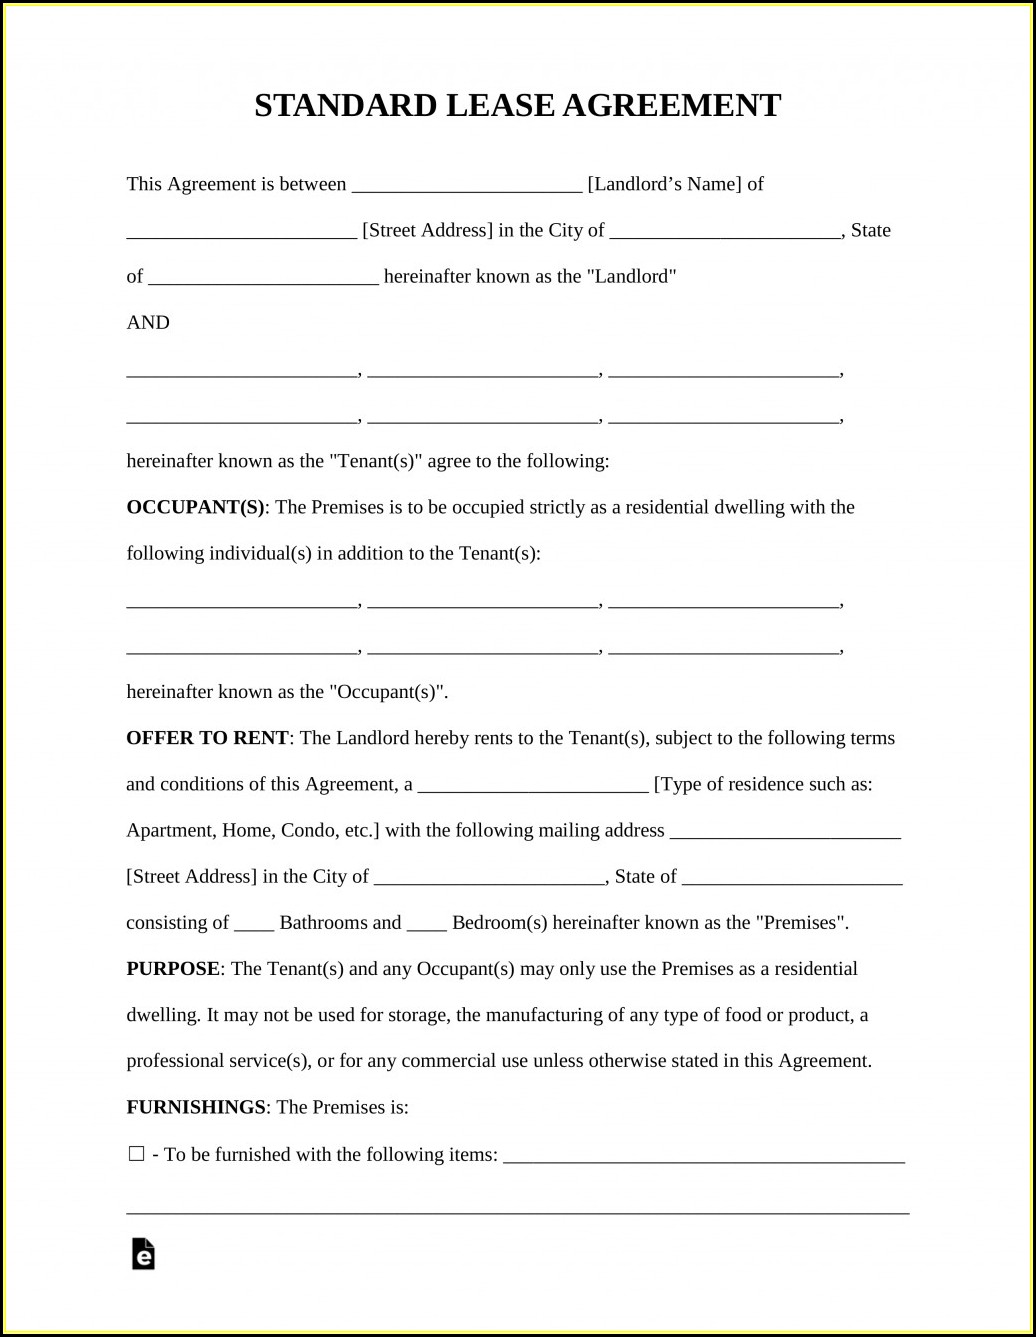 Free Sublet Lease Agreement Template